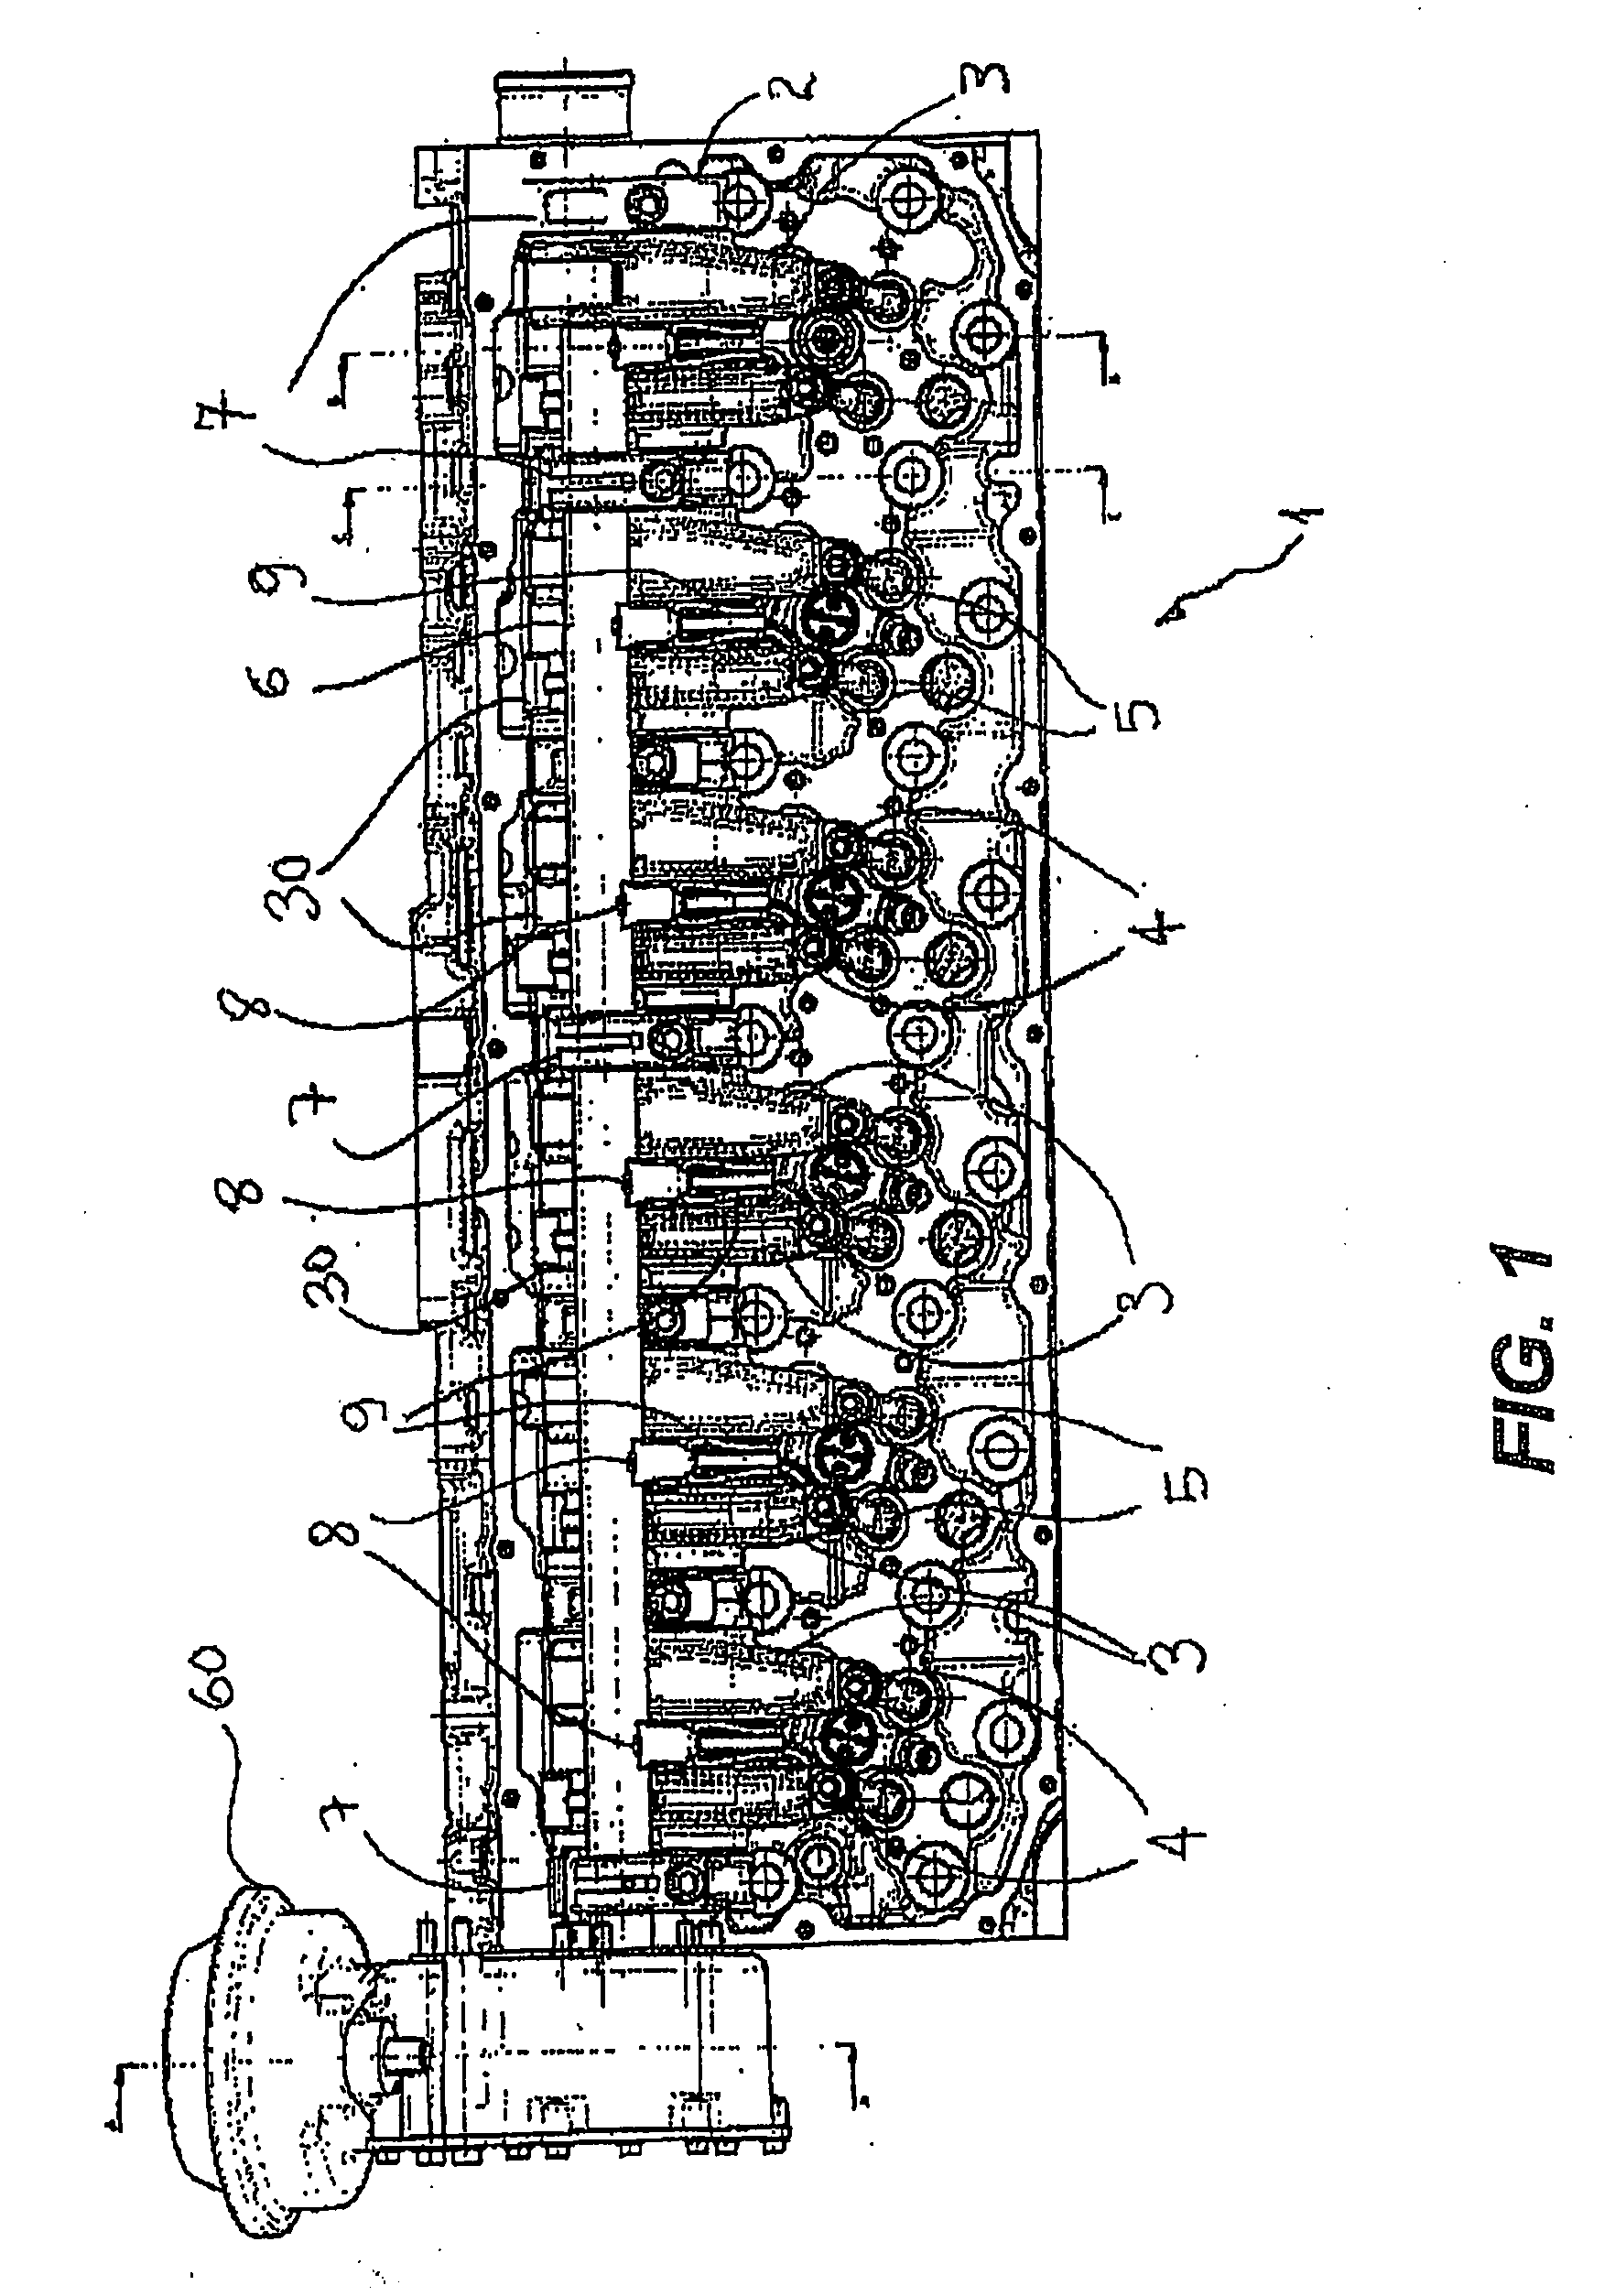 Decompression braking device in endothermic engines